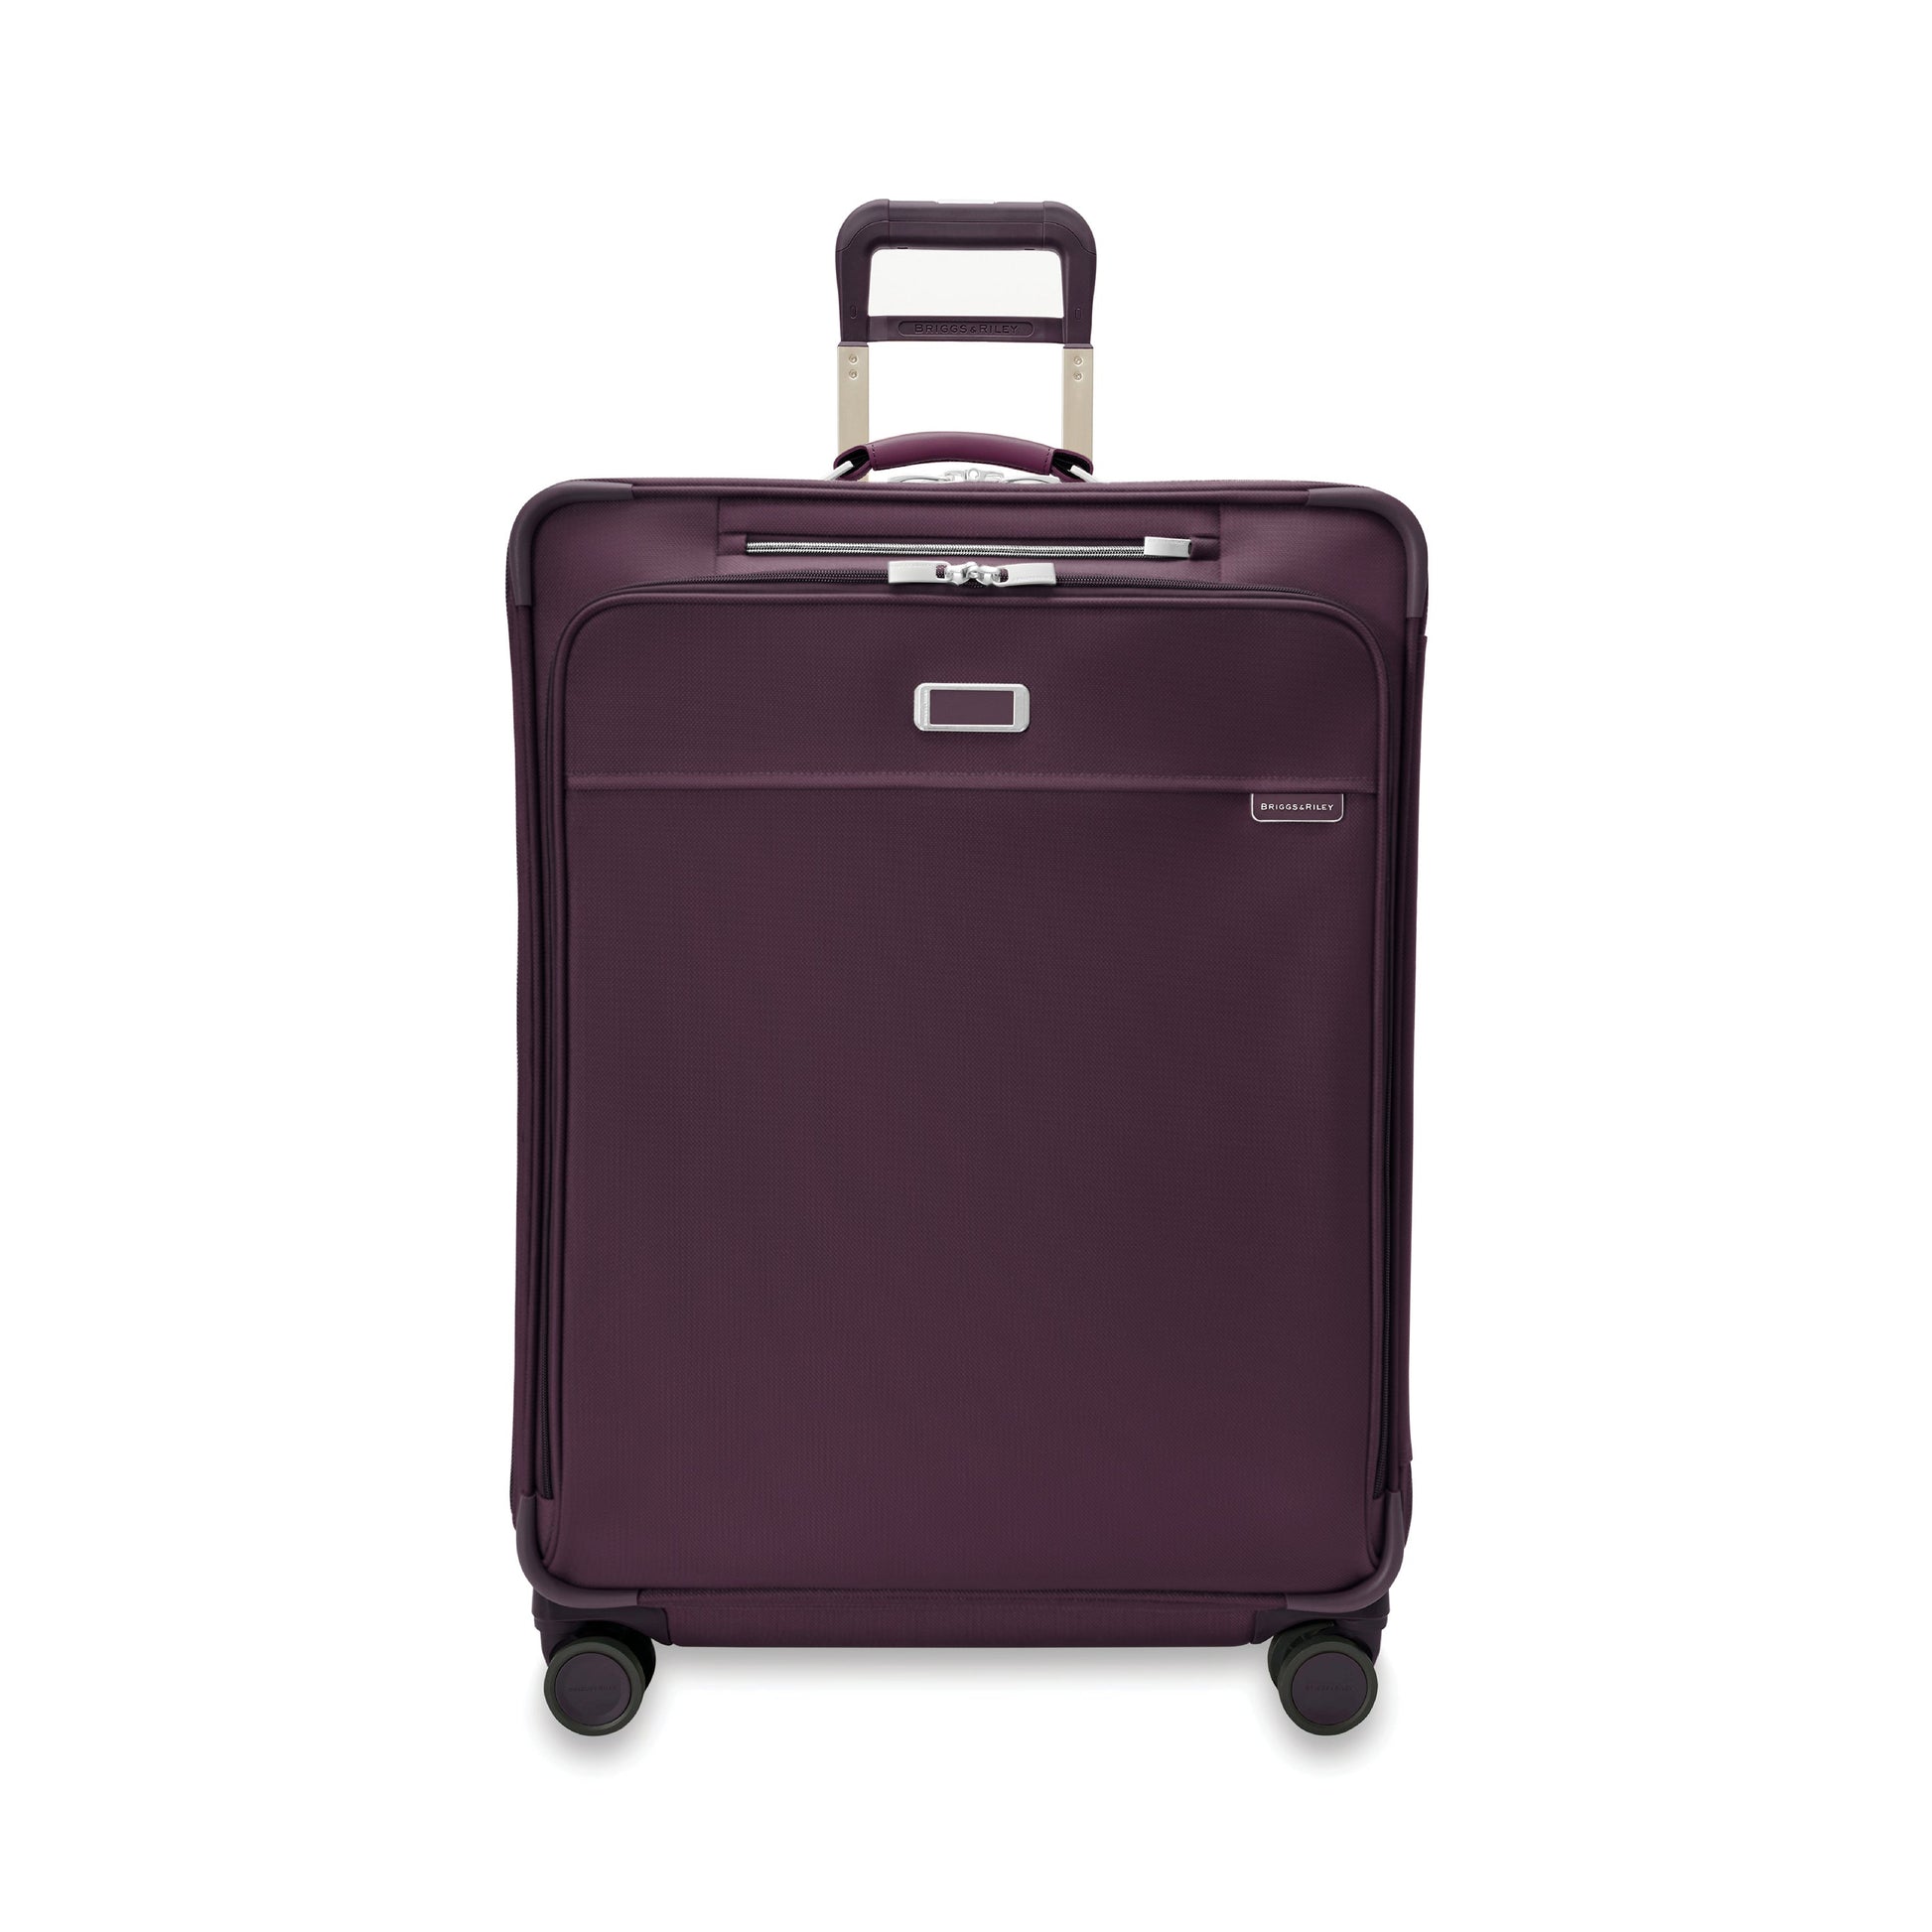 Briggs & Riley NEW Baseline Large Expandable Spinner Luggage - Limited Edition: Plum